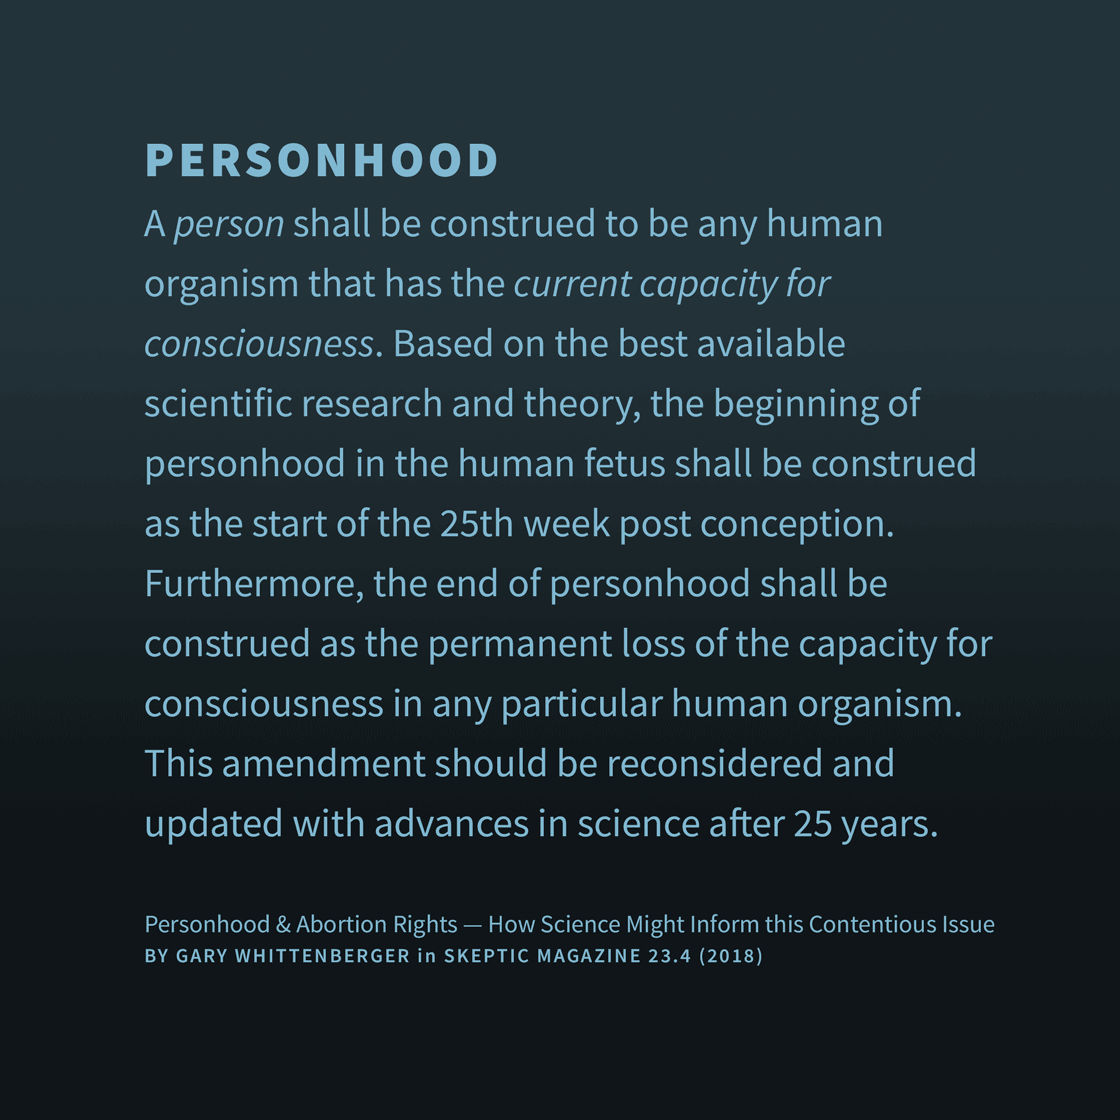 A definition of personhood, by Gary Whittenberger (2018)